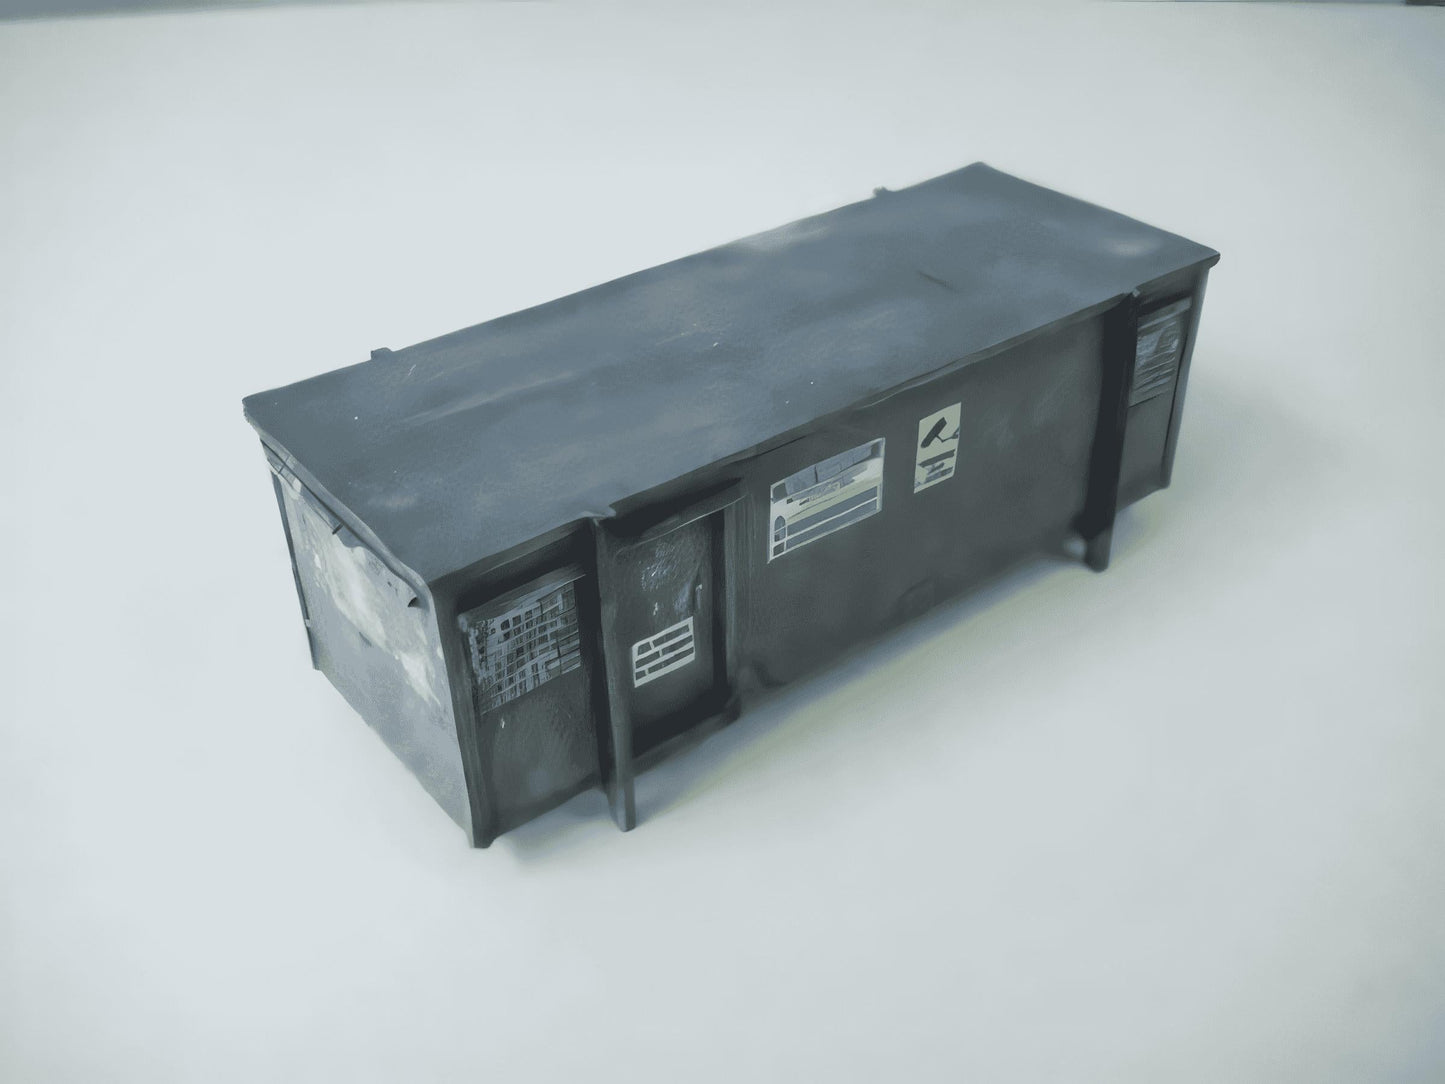 1:76 PORTABLE WORKS CABIN